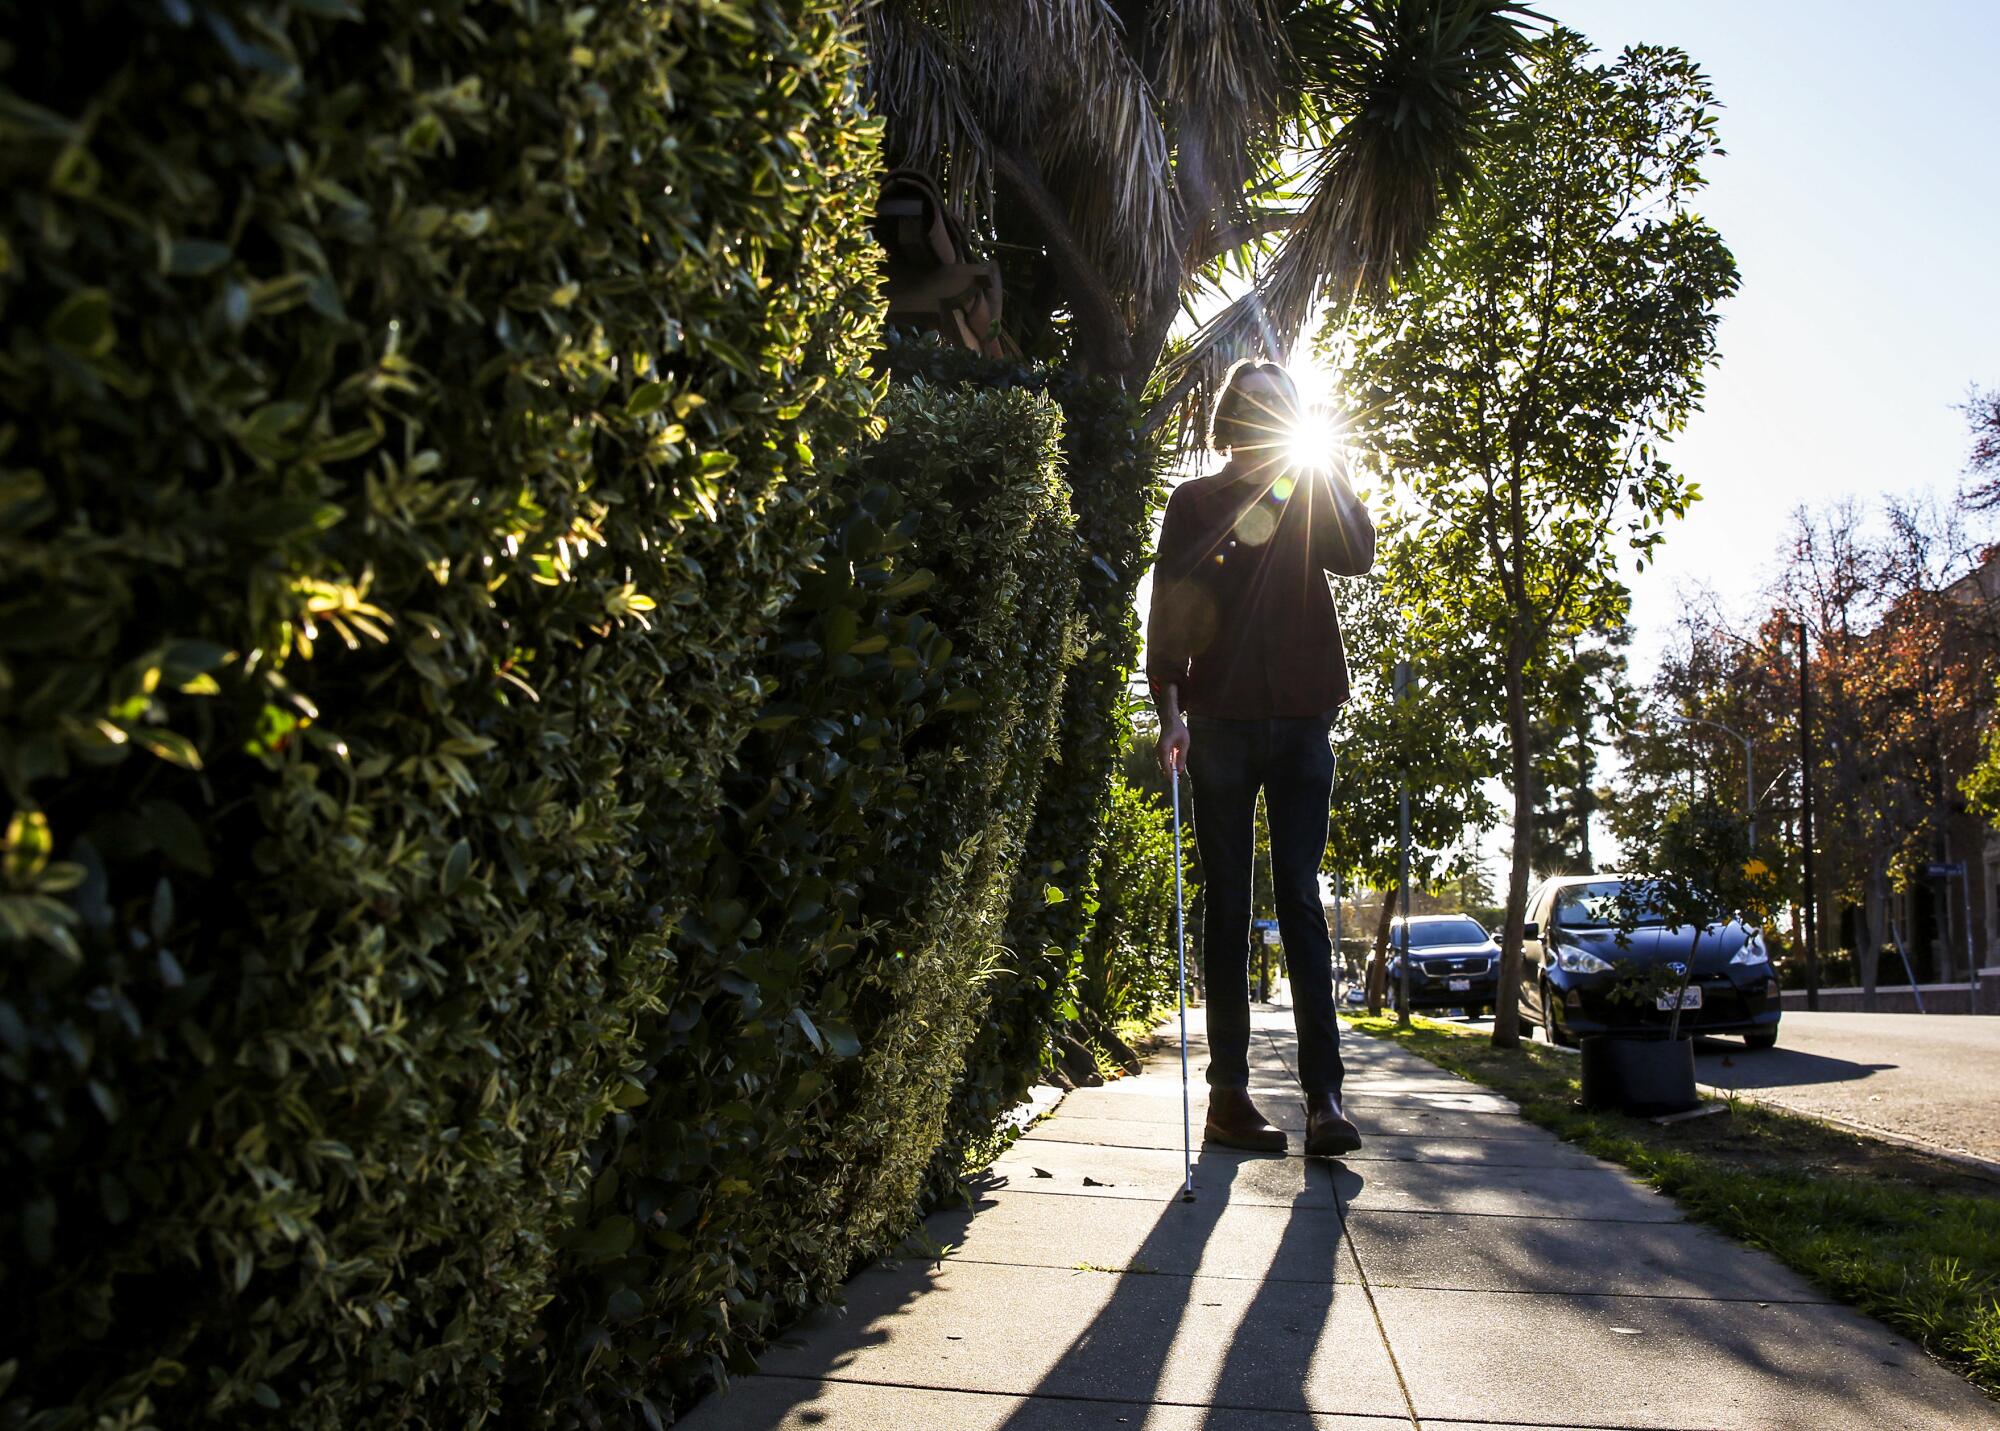 Will Butler, 31, walks to the grocery store from his home in Silver Lake.